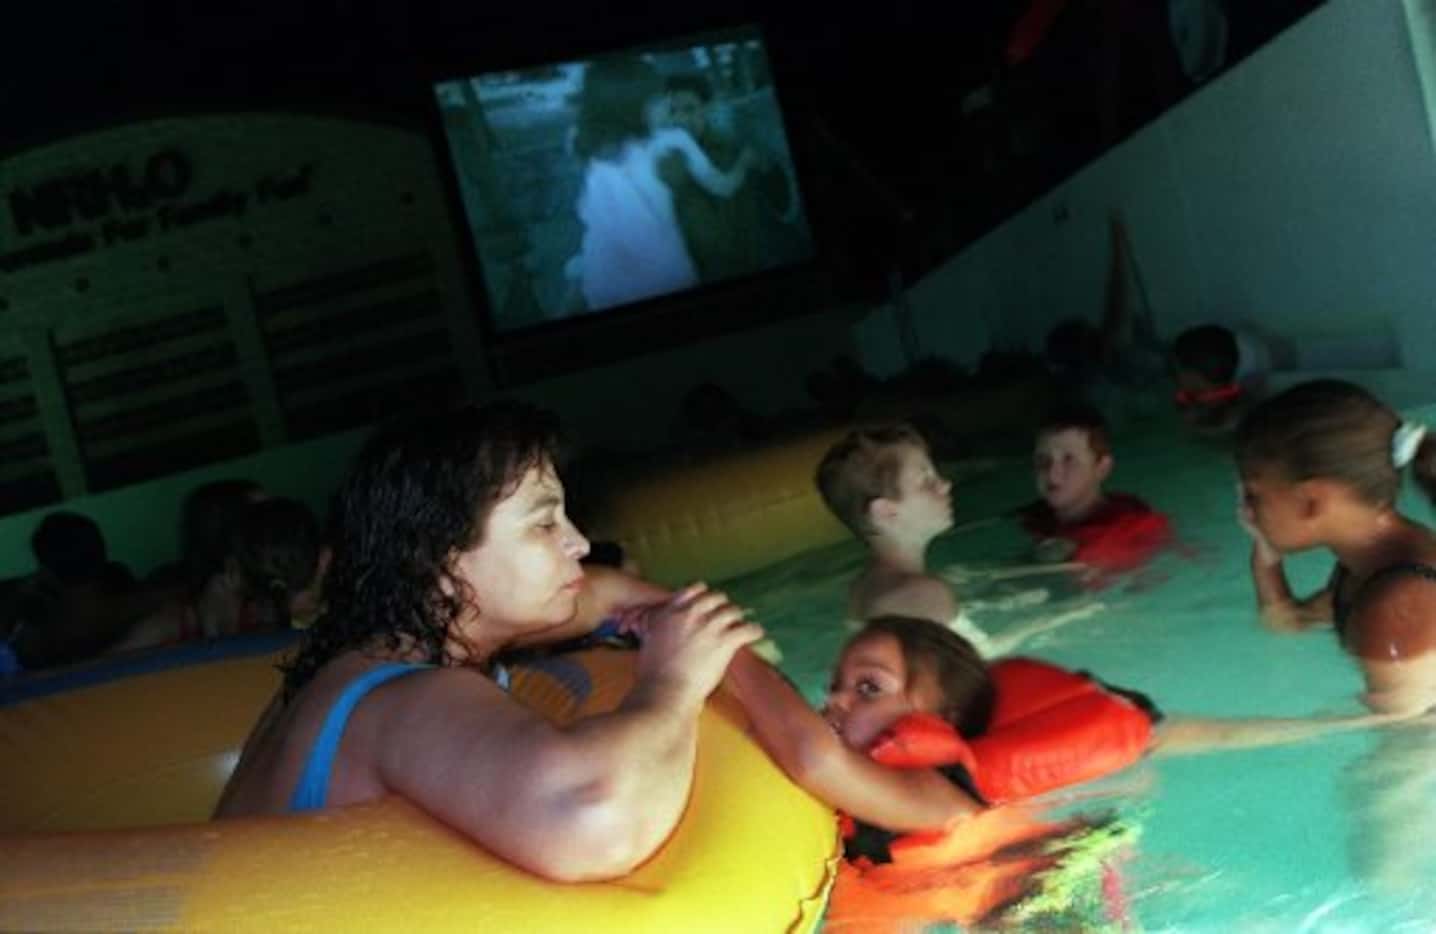 NRH2O Water Park has 'Dive-In Movie' nights where customers either sit on lawn chairs or in...